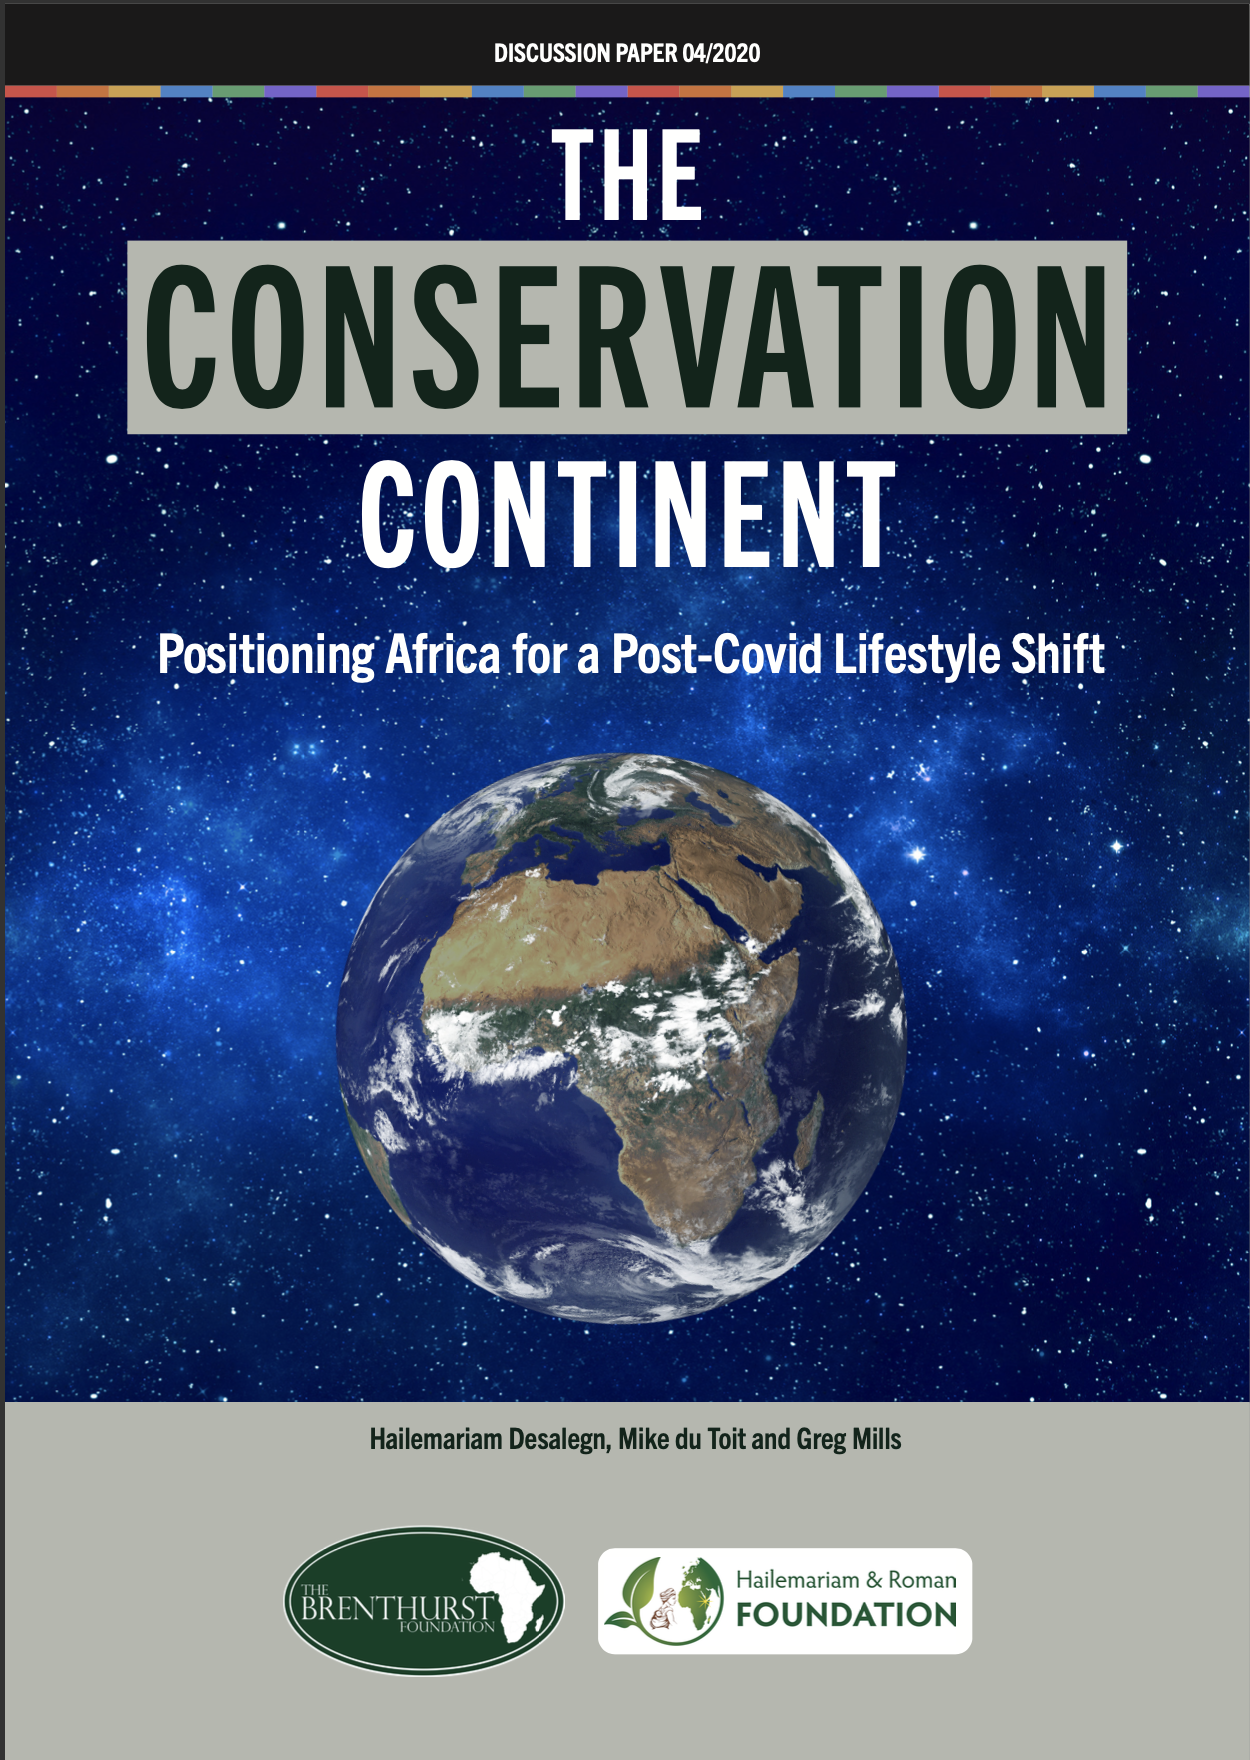 The Conservation Continent:  Positioning Africa for a Post-Covid Lifestyle Shift